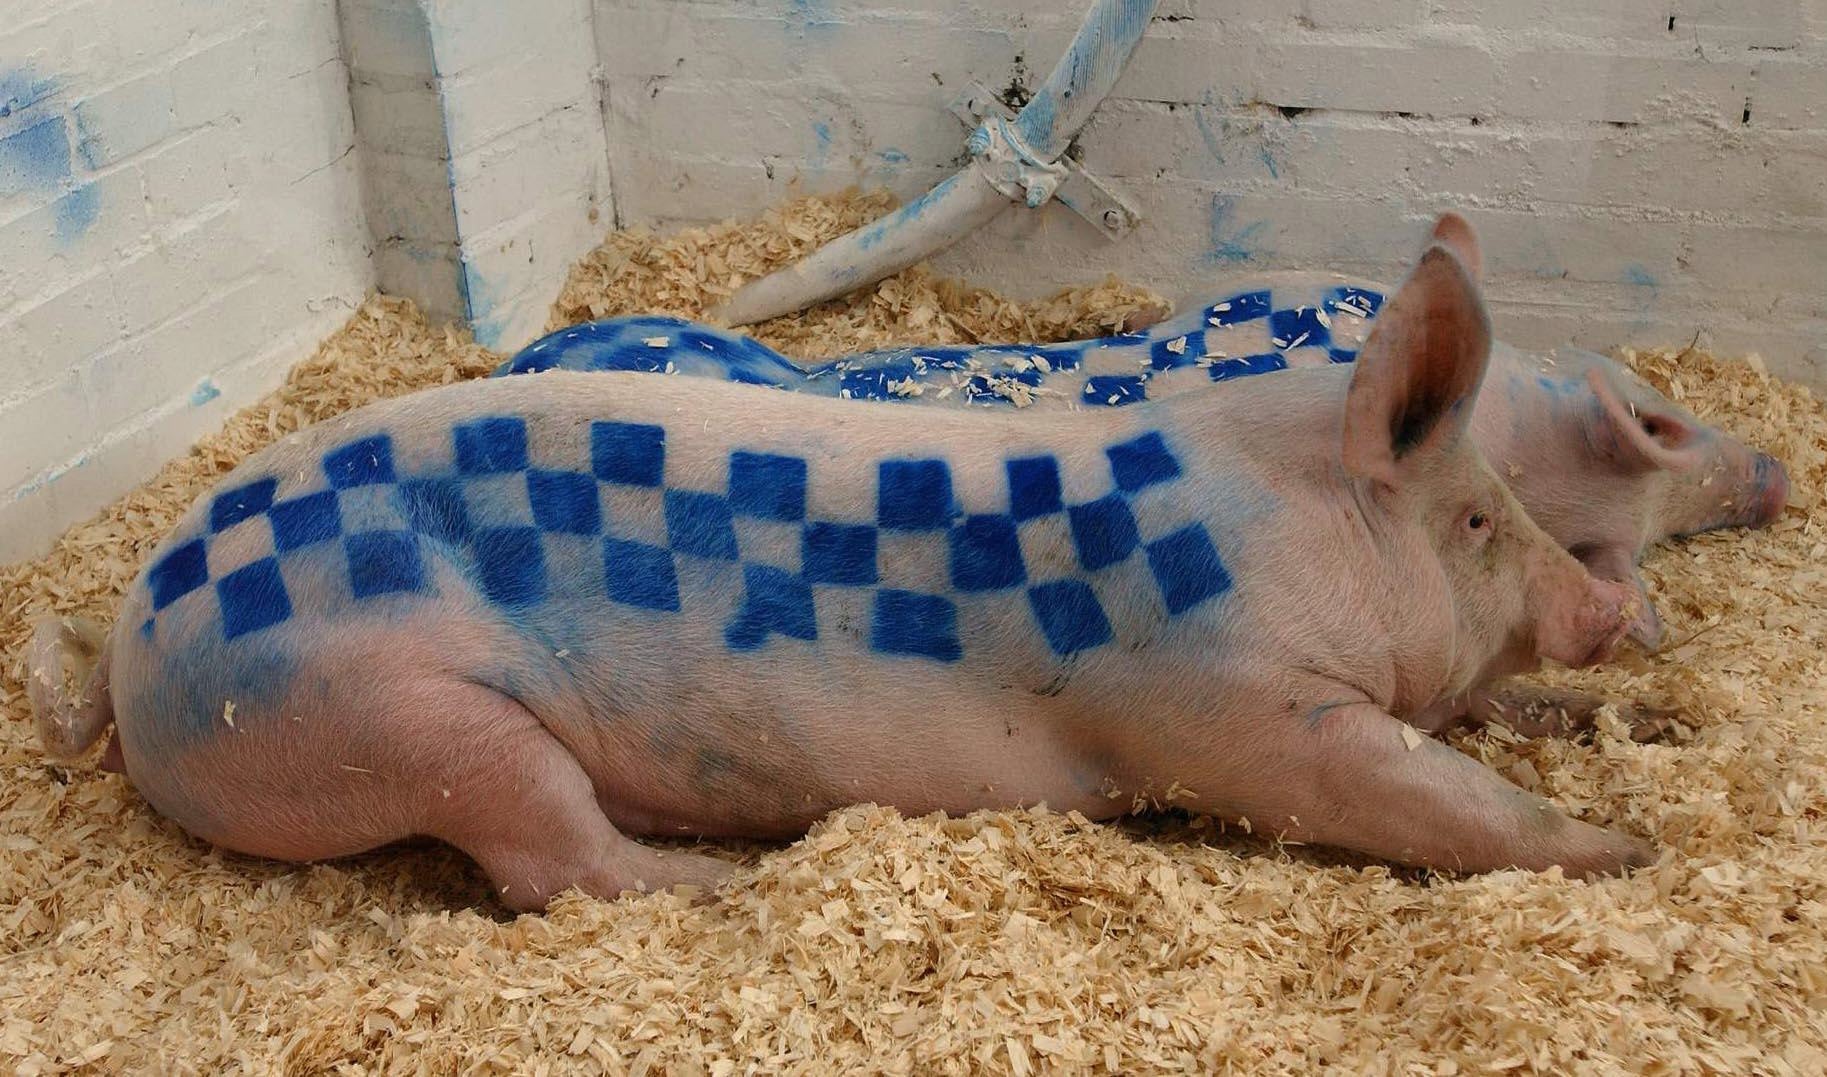 A live pig at Banksy’s first UK exhibition, 2003’s Turf War